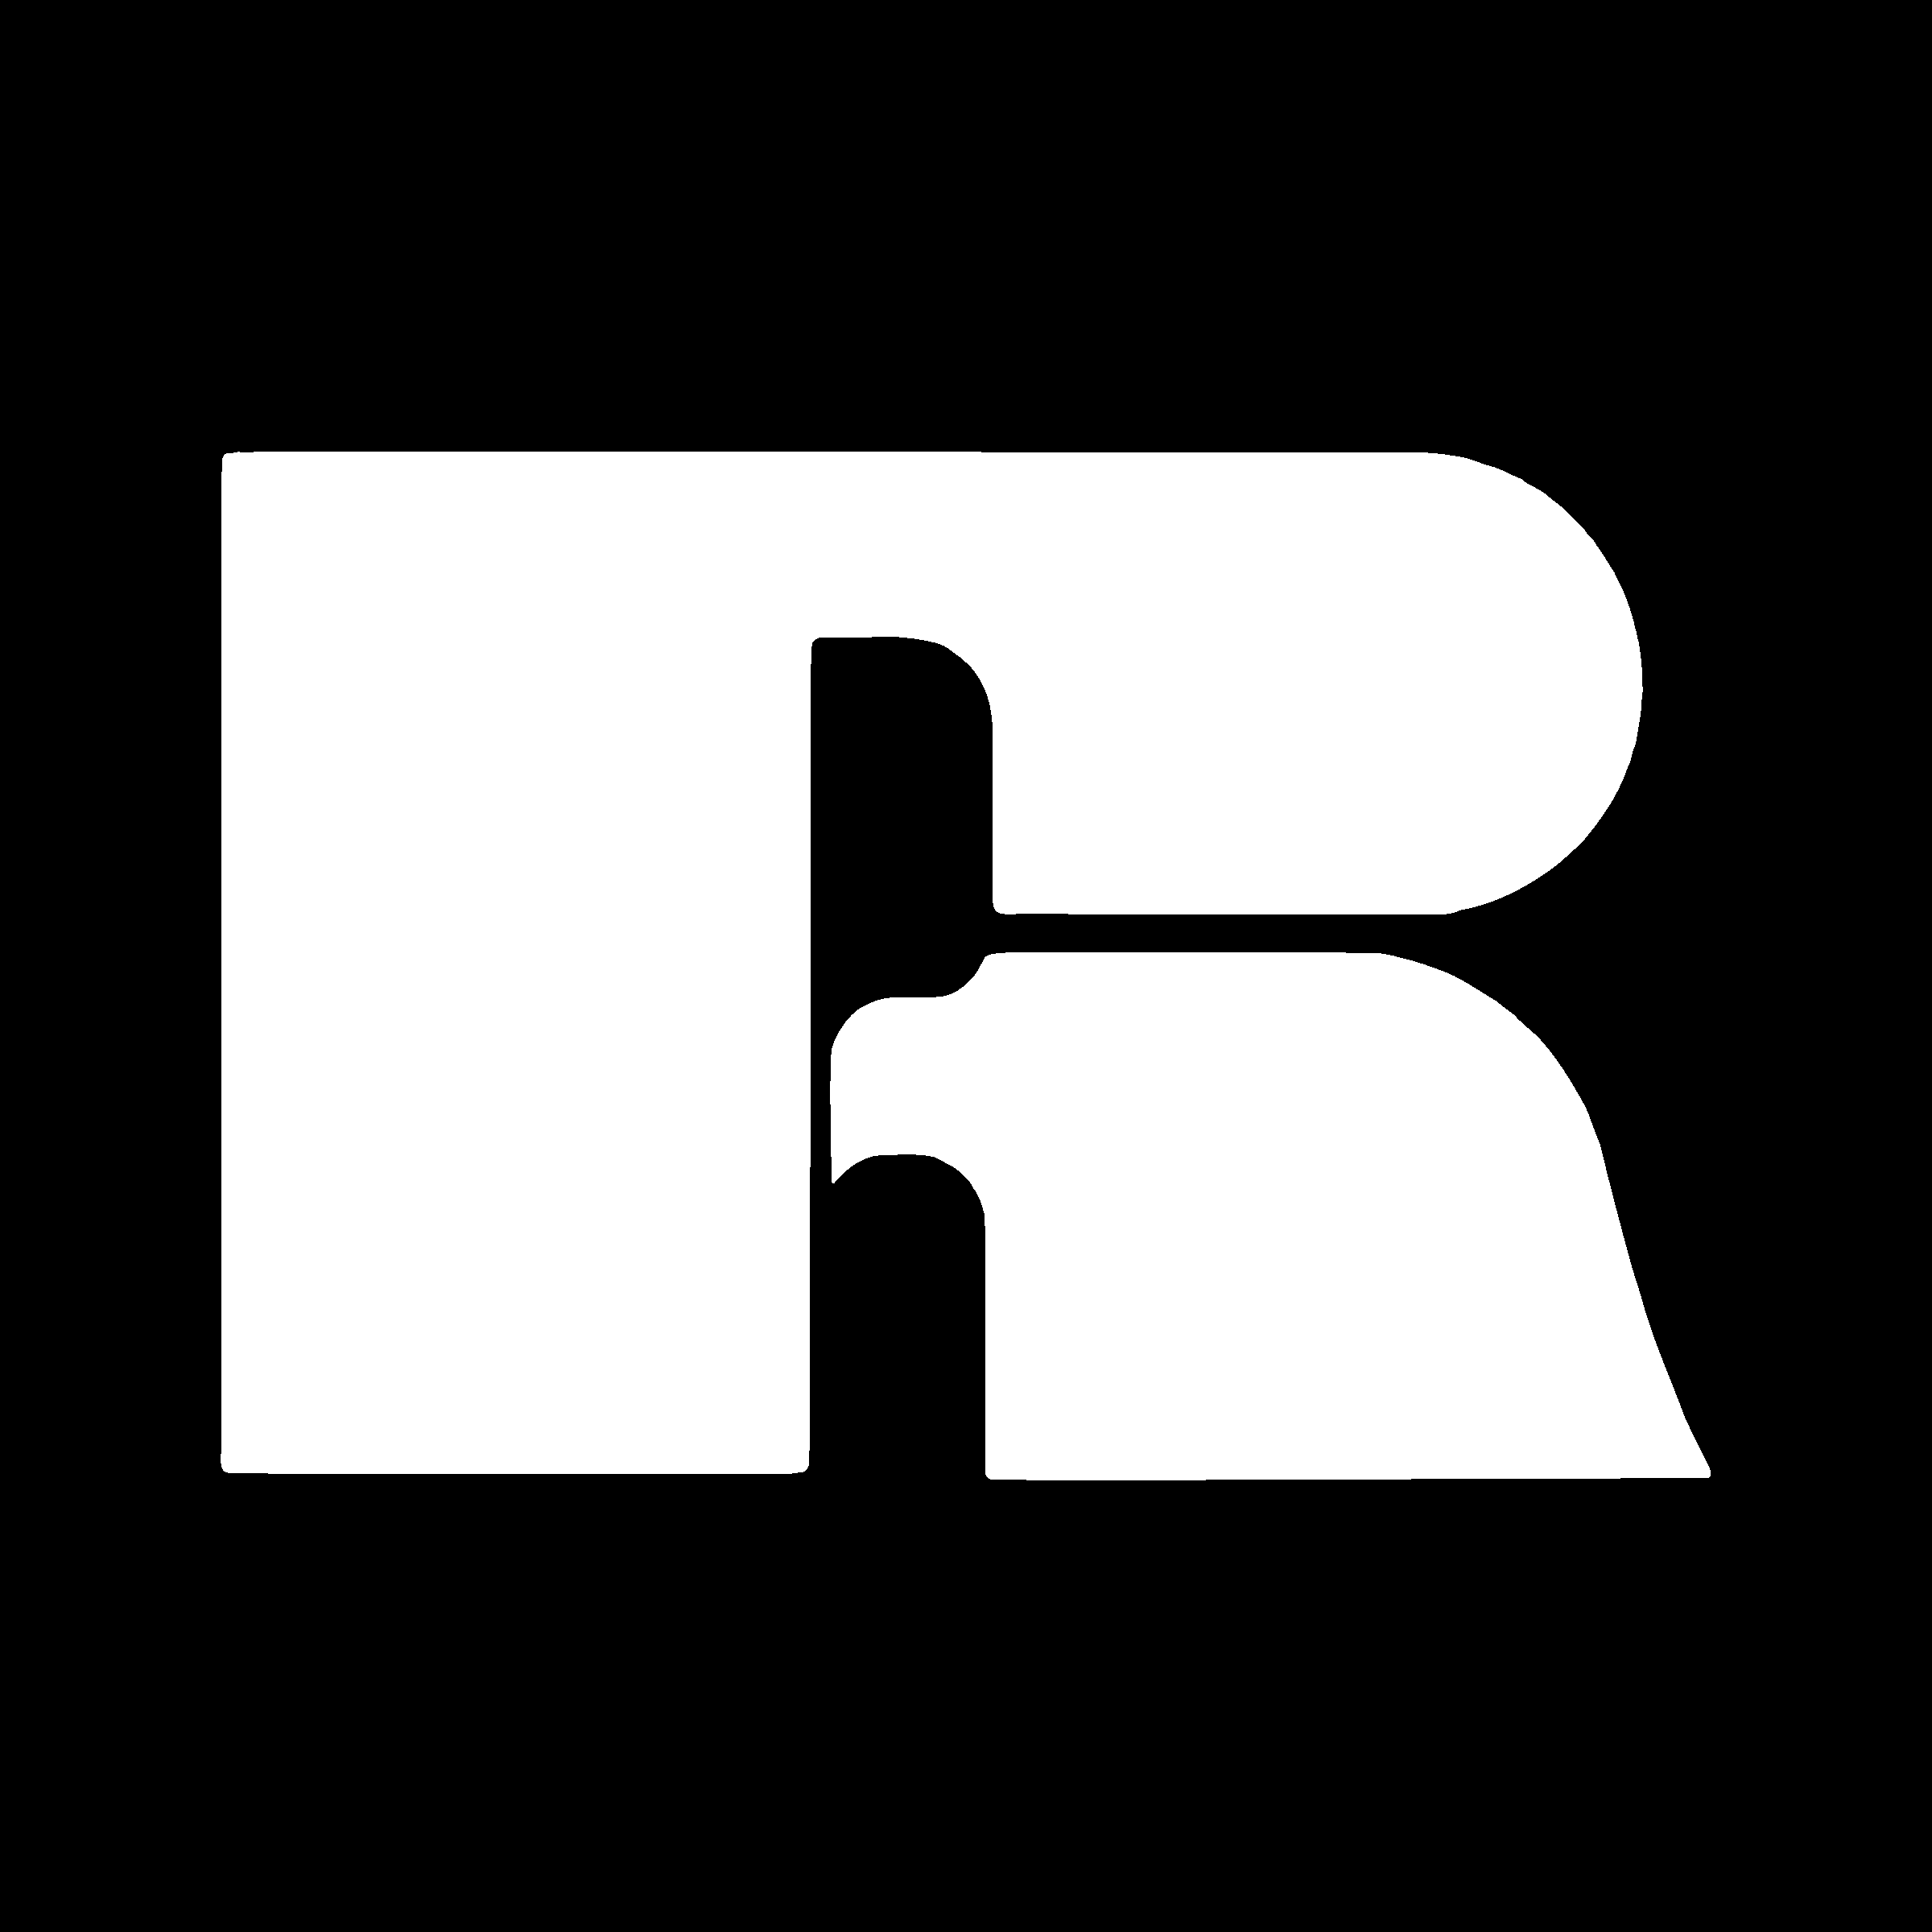 Russell Logo - Russell Logo PNG Transparent & SVG Vector